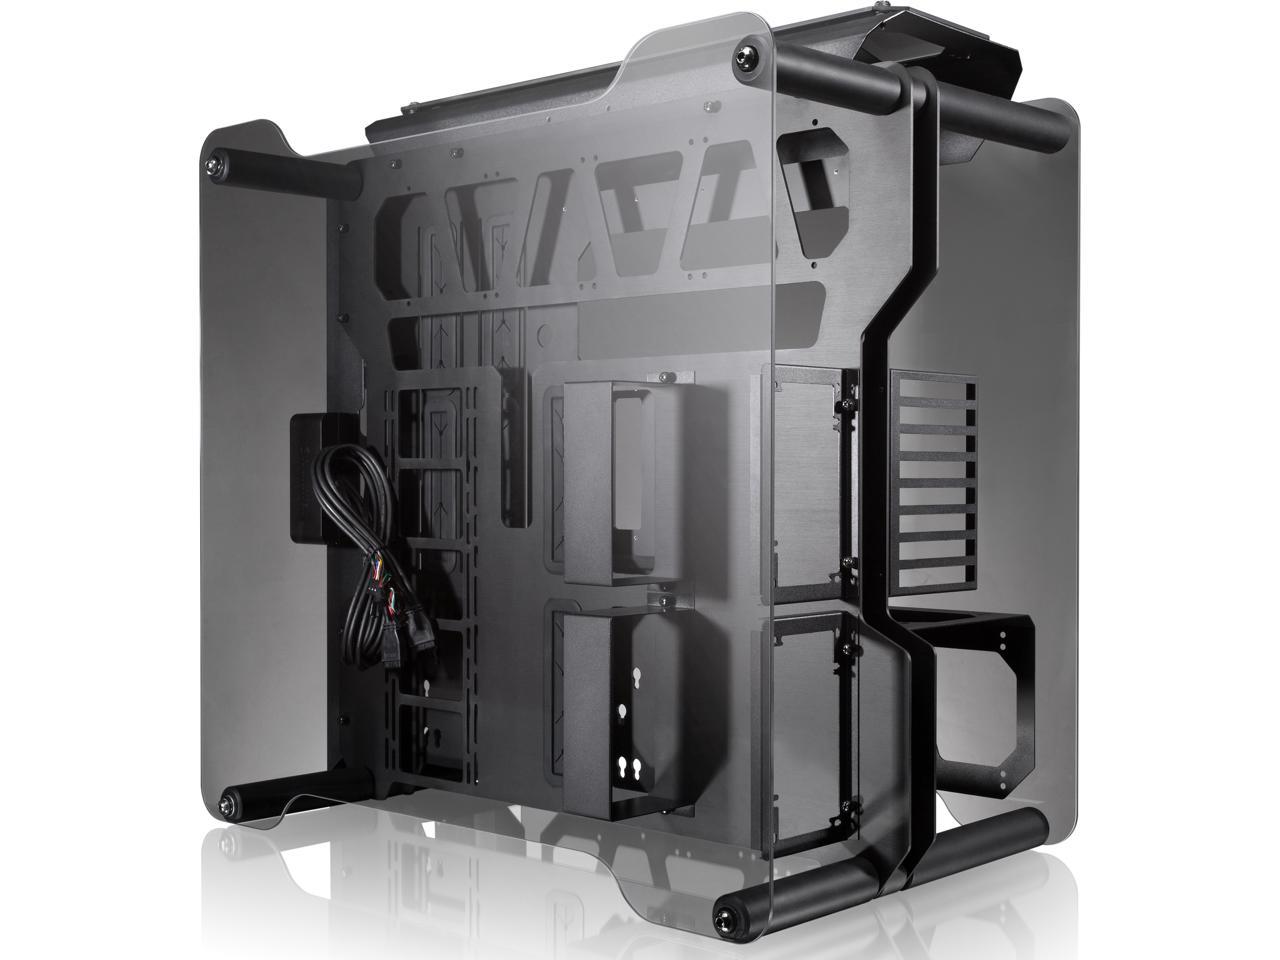 ENYO, a Goliath Chassis of the Open Frame / Benching Case, is designed to fulfil the biggest dream of any high end enthusiast in terms of Water Cooling or Air Cooling with the most powerful component